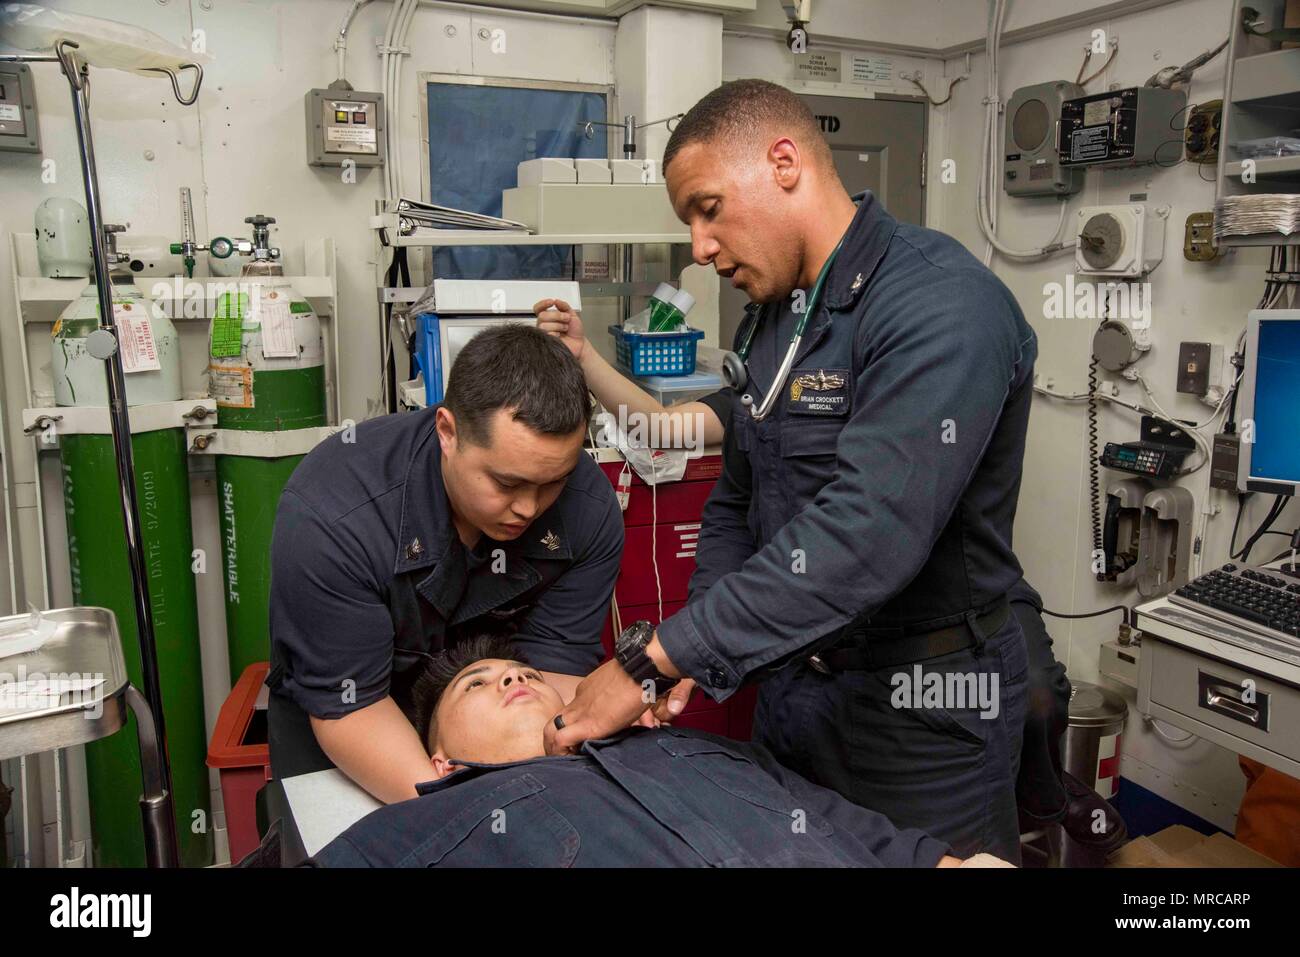 170603-N-KJ380-240  ATLANTIC OCEAN (June 3, 2017) Hospital Corpsman 1st Class Frederick Ehlers, left, and Hospital Corpsman 2nd Class Brian Crockett examine Midshipman 1st Class Justin Bongco during a medical emergency drill aboard the aircraft carrier USS Dwight D. Eisenhower (CVN 69) (Ike). Ike is currently conducting aircraft carrier qualifications during the sustainment phase of the Optimized Fleet Response Plan (OFRP). (U.S. Navy photo by Mass Communication Specialist Seaman Neo B. Greene III) Stock Photo